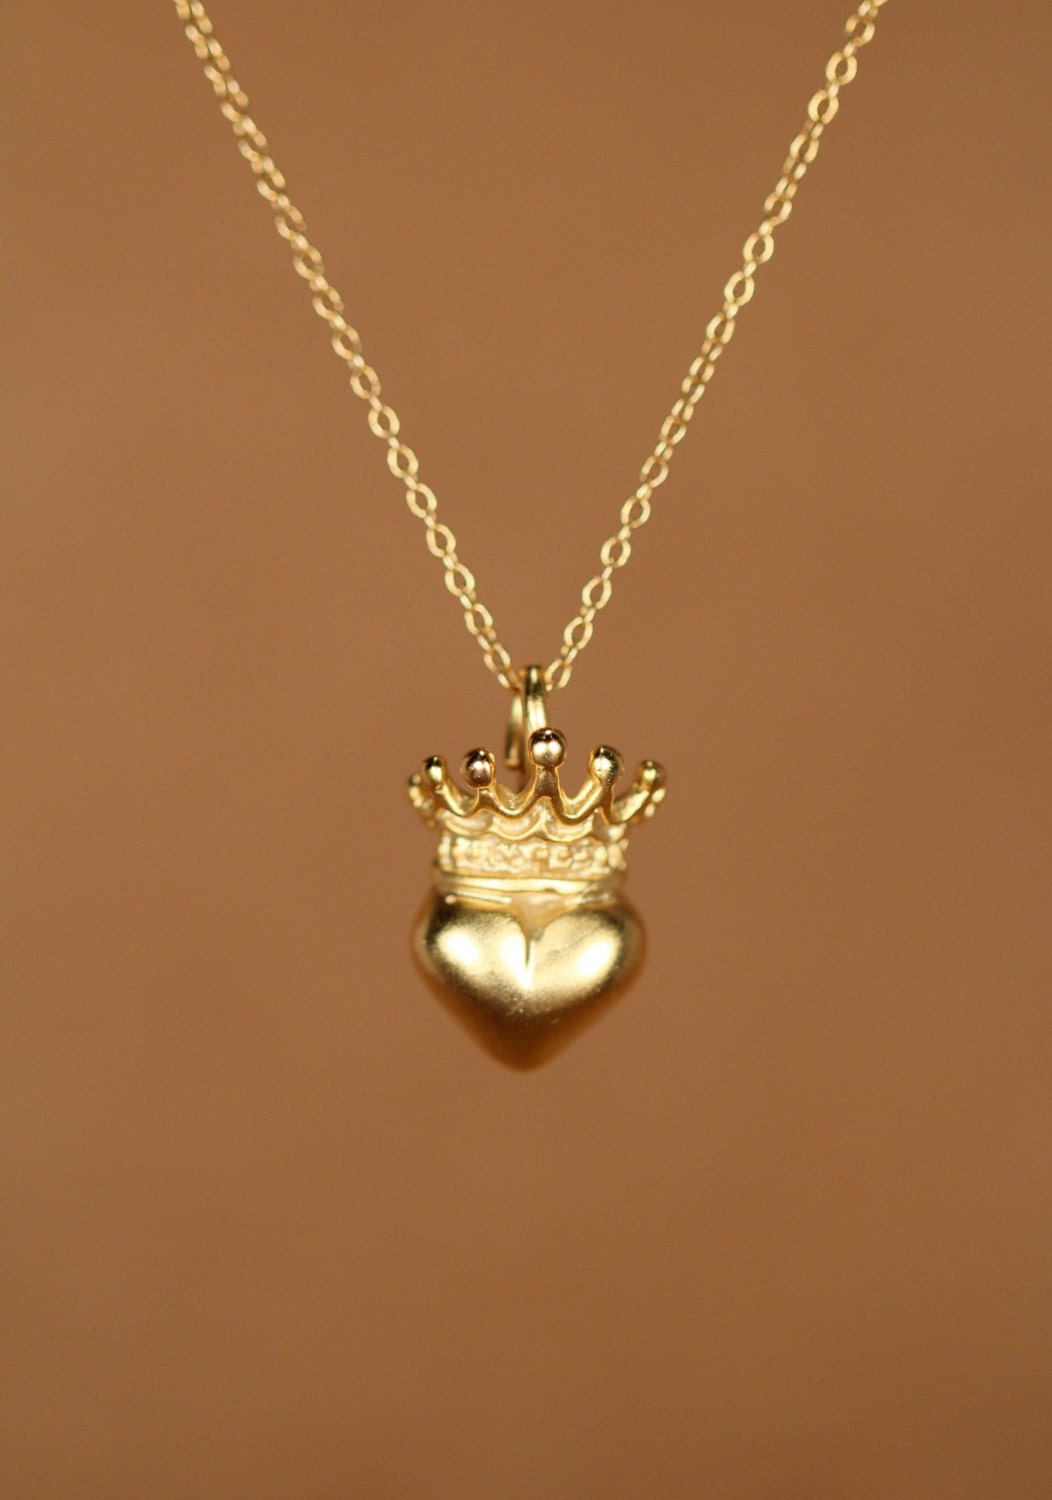 QUEEN OF HEARTS NECKLACE – Pezzi